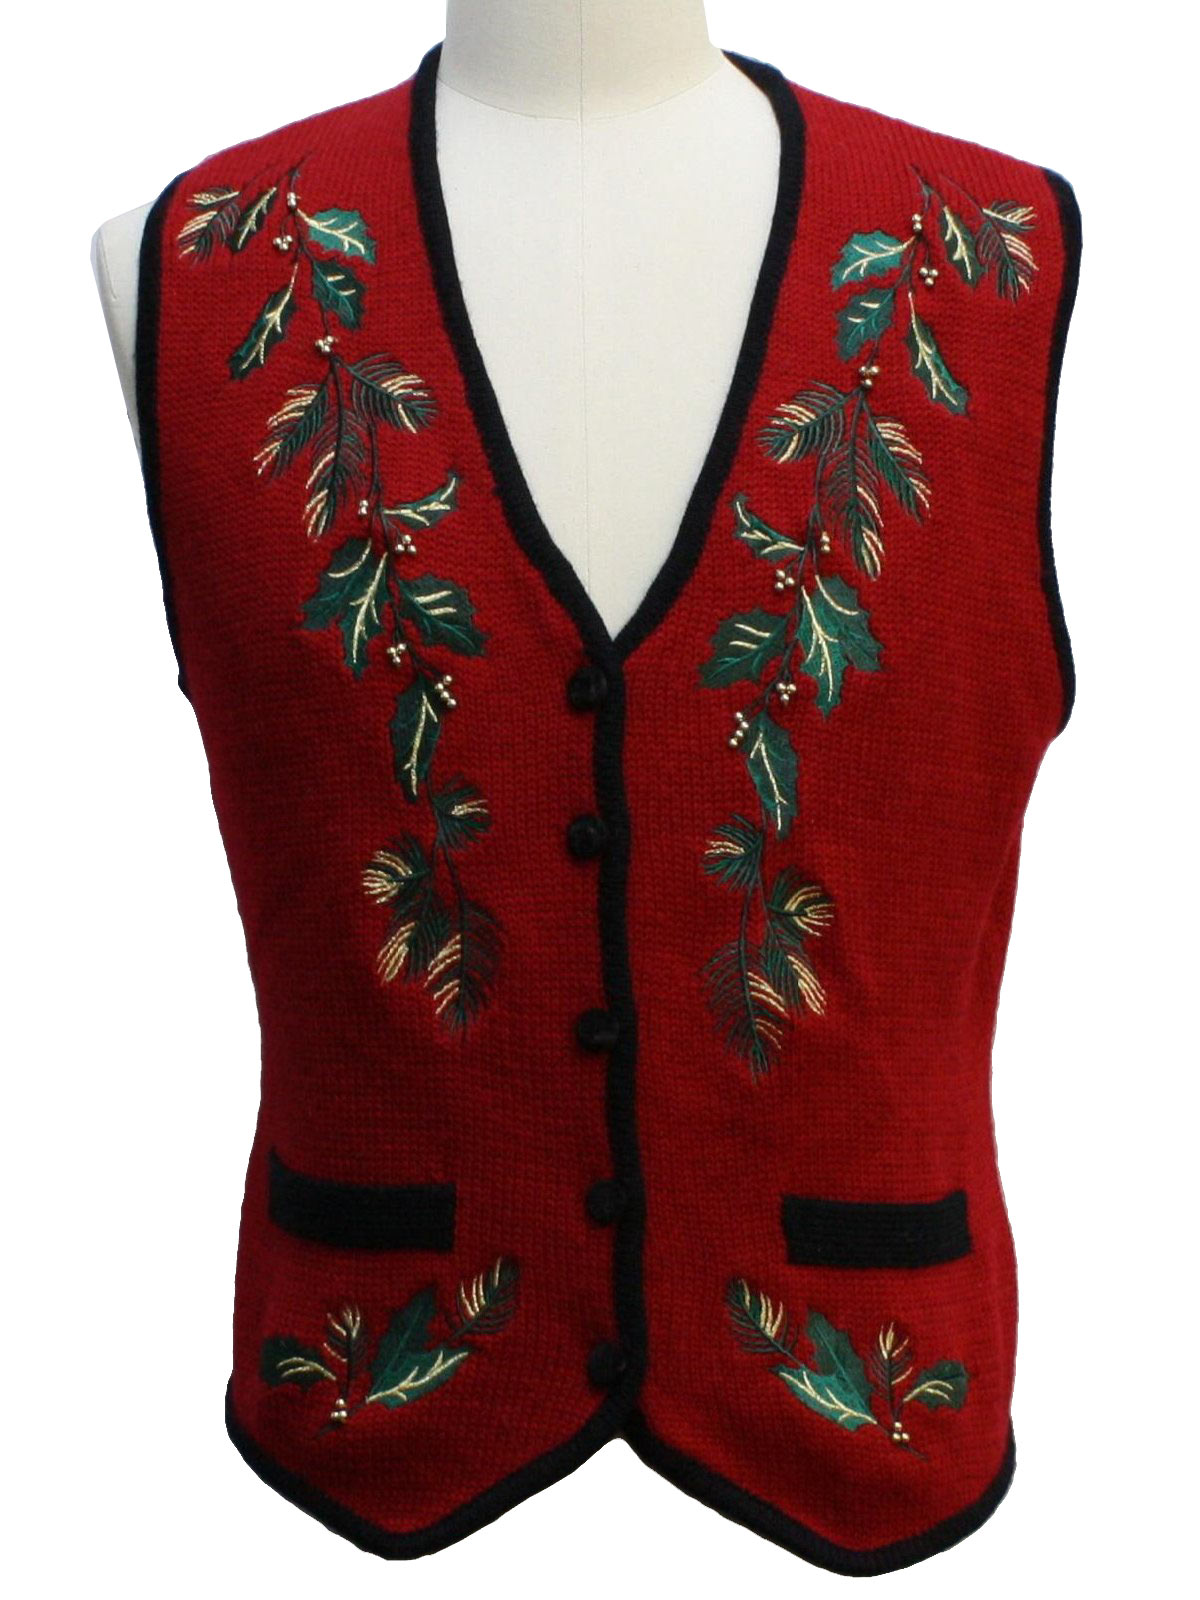 Womens Ugly Christmas Sweater Vest : -Talbots - Womens Red background ...